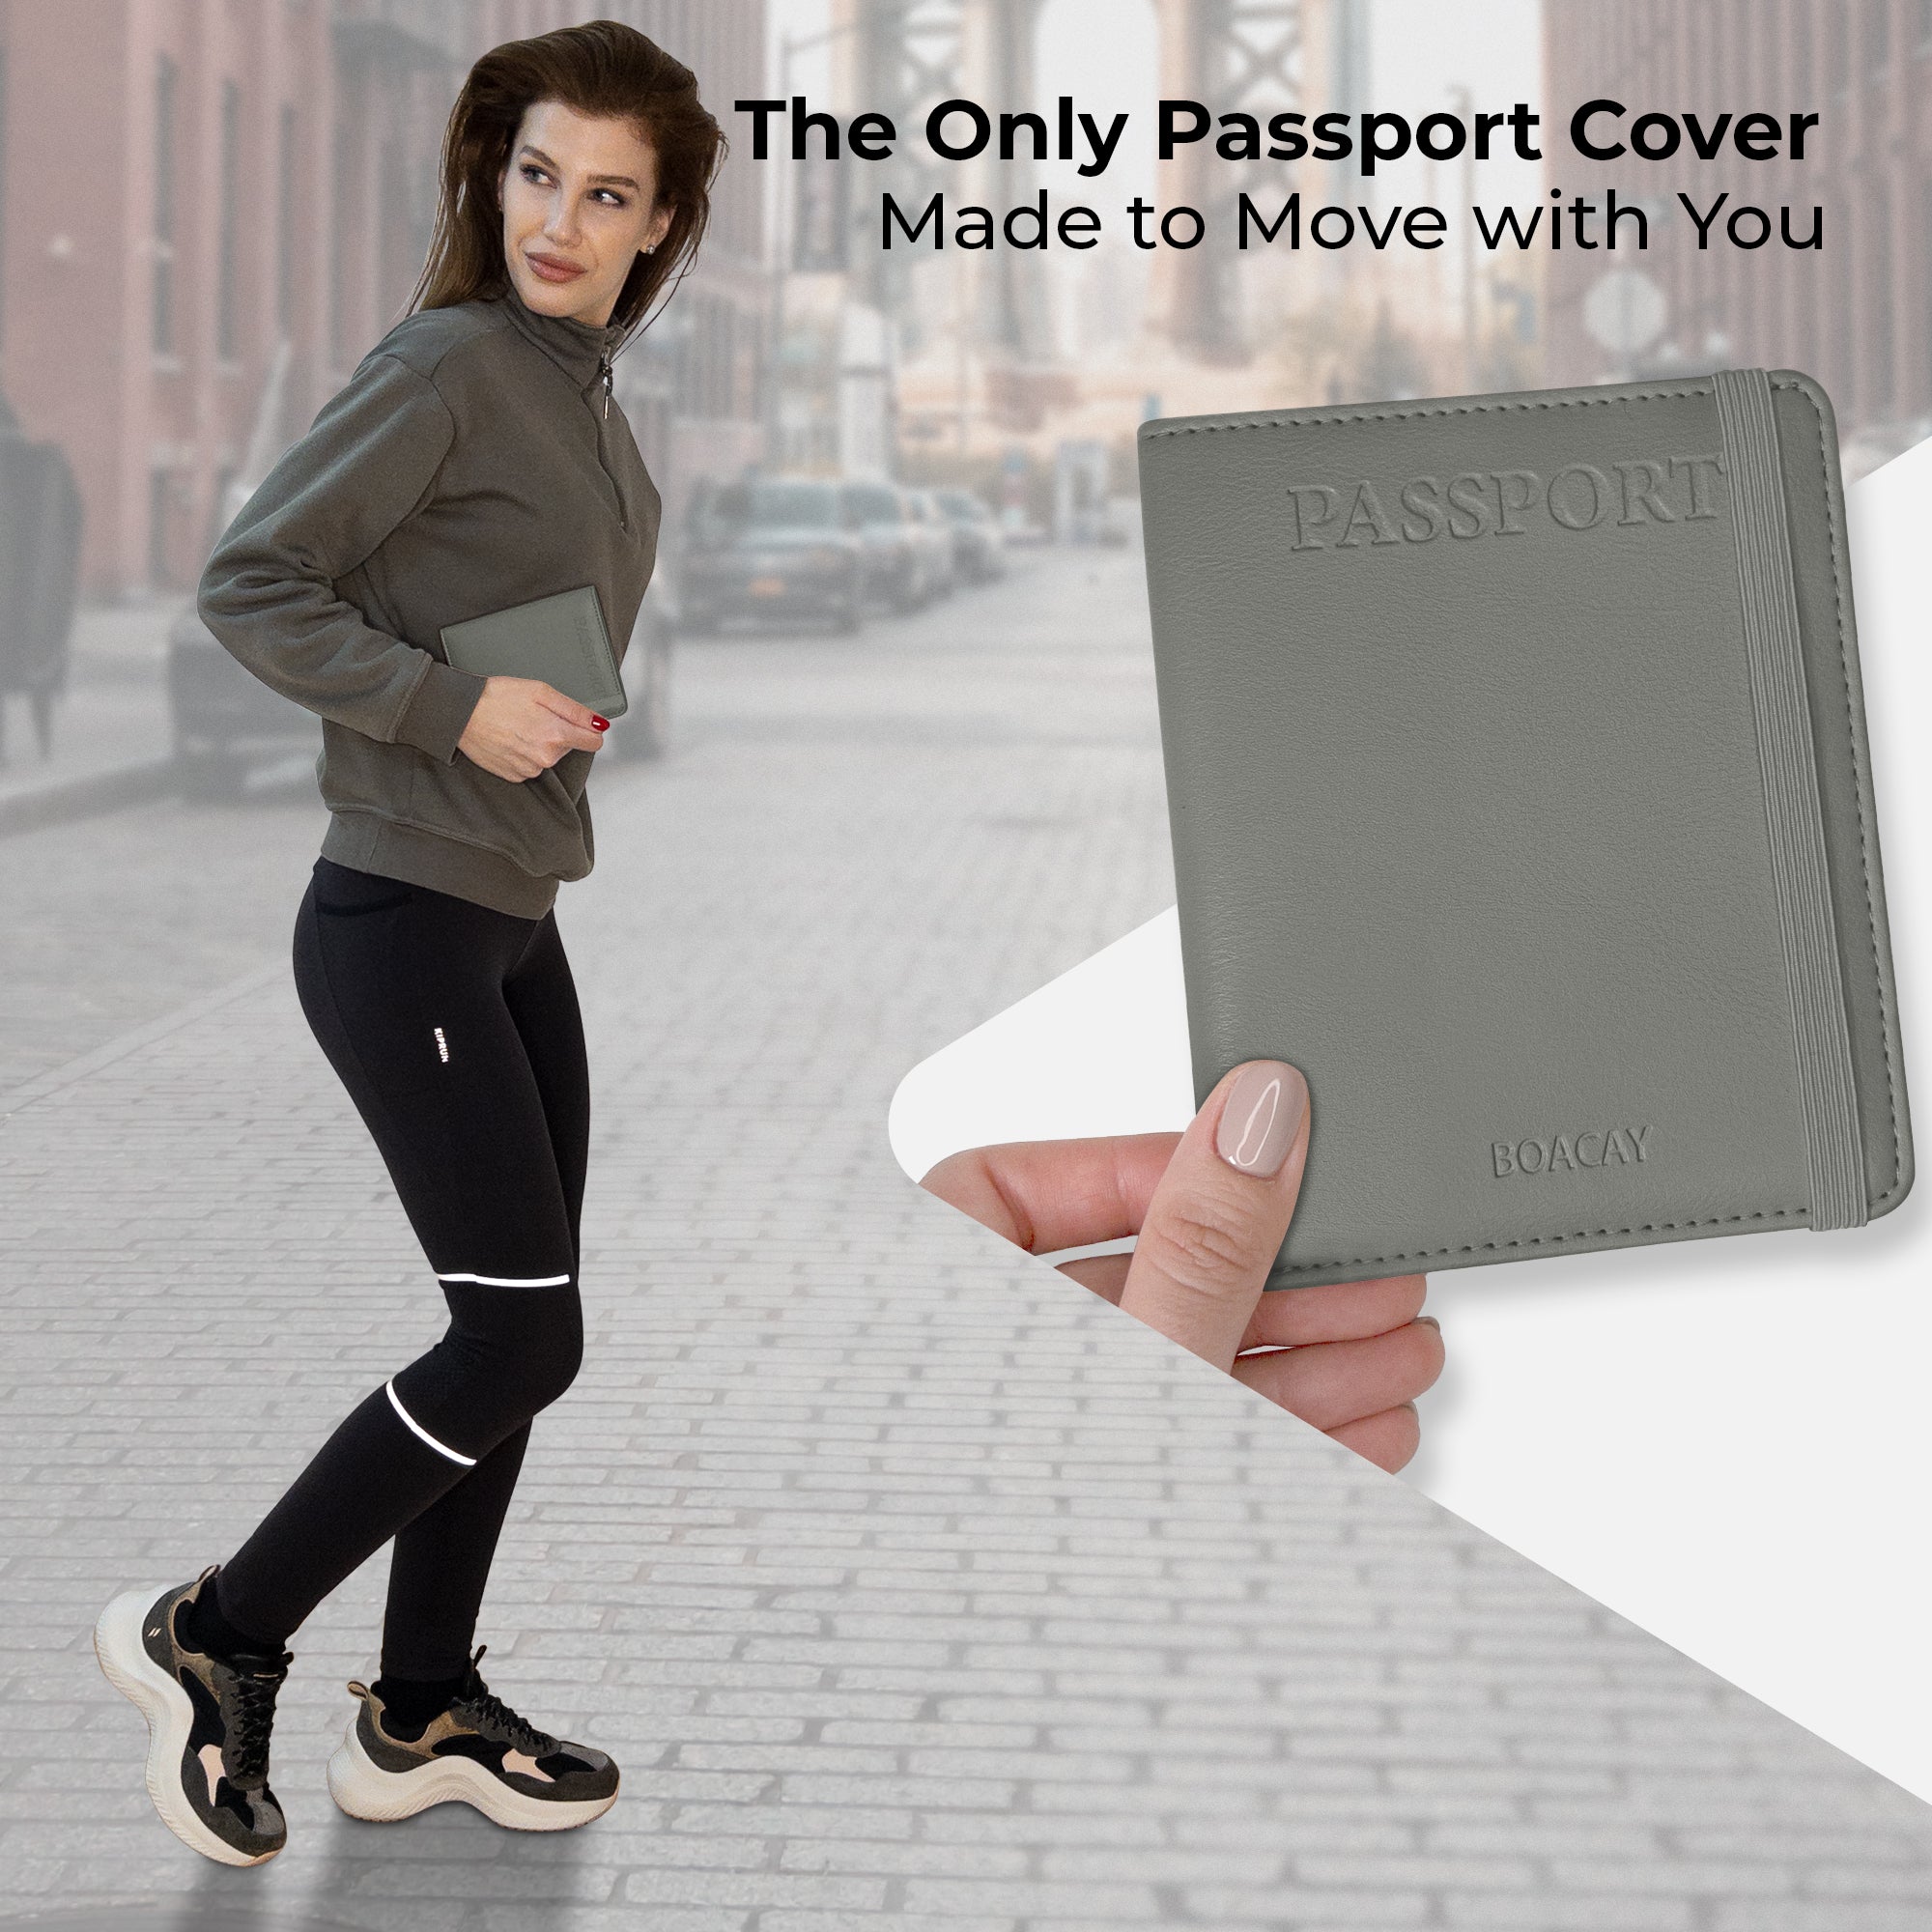 BOACAY Passport Holder and Vaccine Card Slot Combo - Travel Wallet and Waterproof Case for Women, Men, Kids - Cute PU Leather Passport Cover